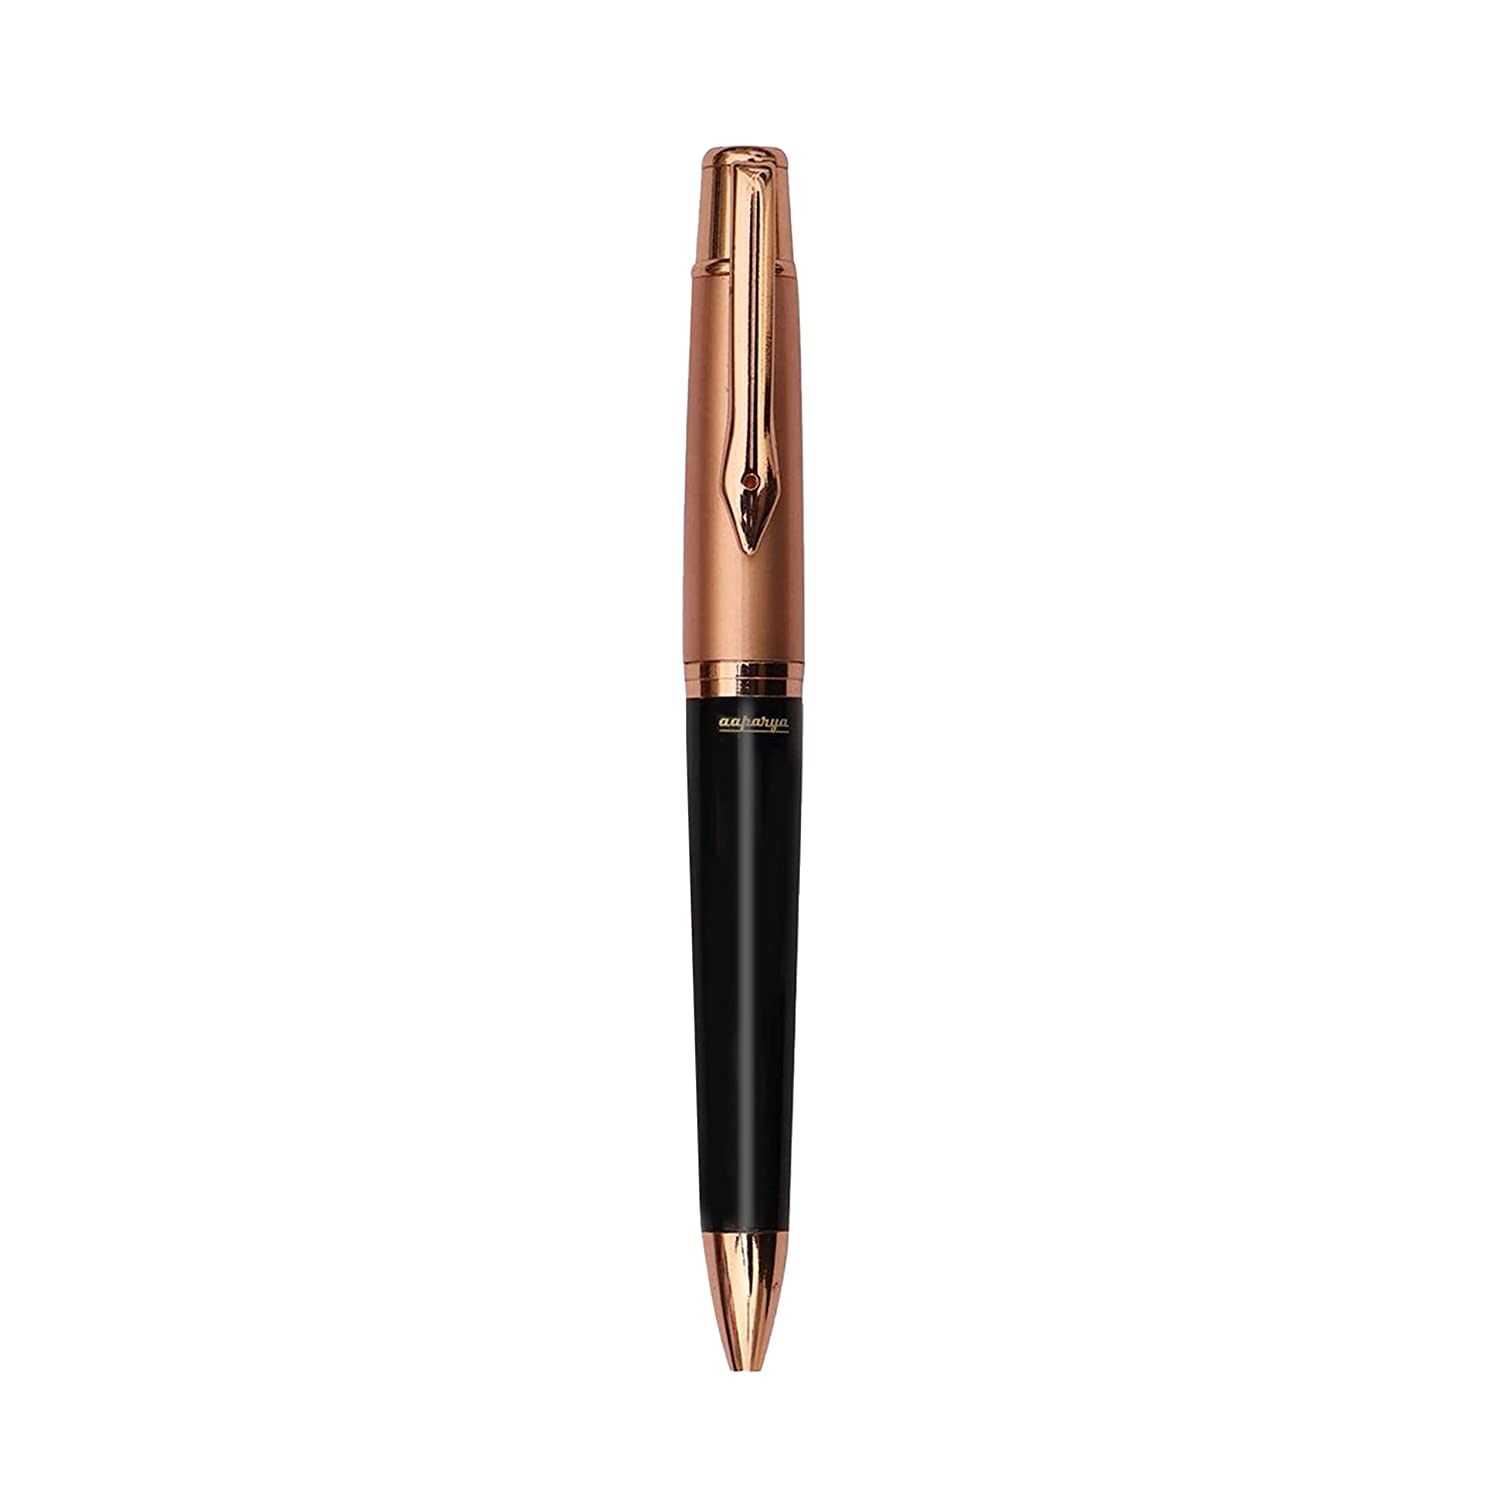 Aaparya Premium Ball Pen Rose Gold and Black, APMarvik Designer & Luxury Pen with Genuine Leather Cover for Gift